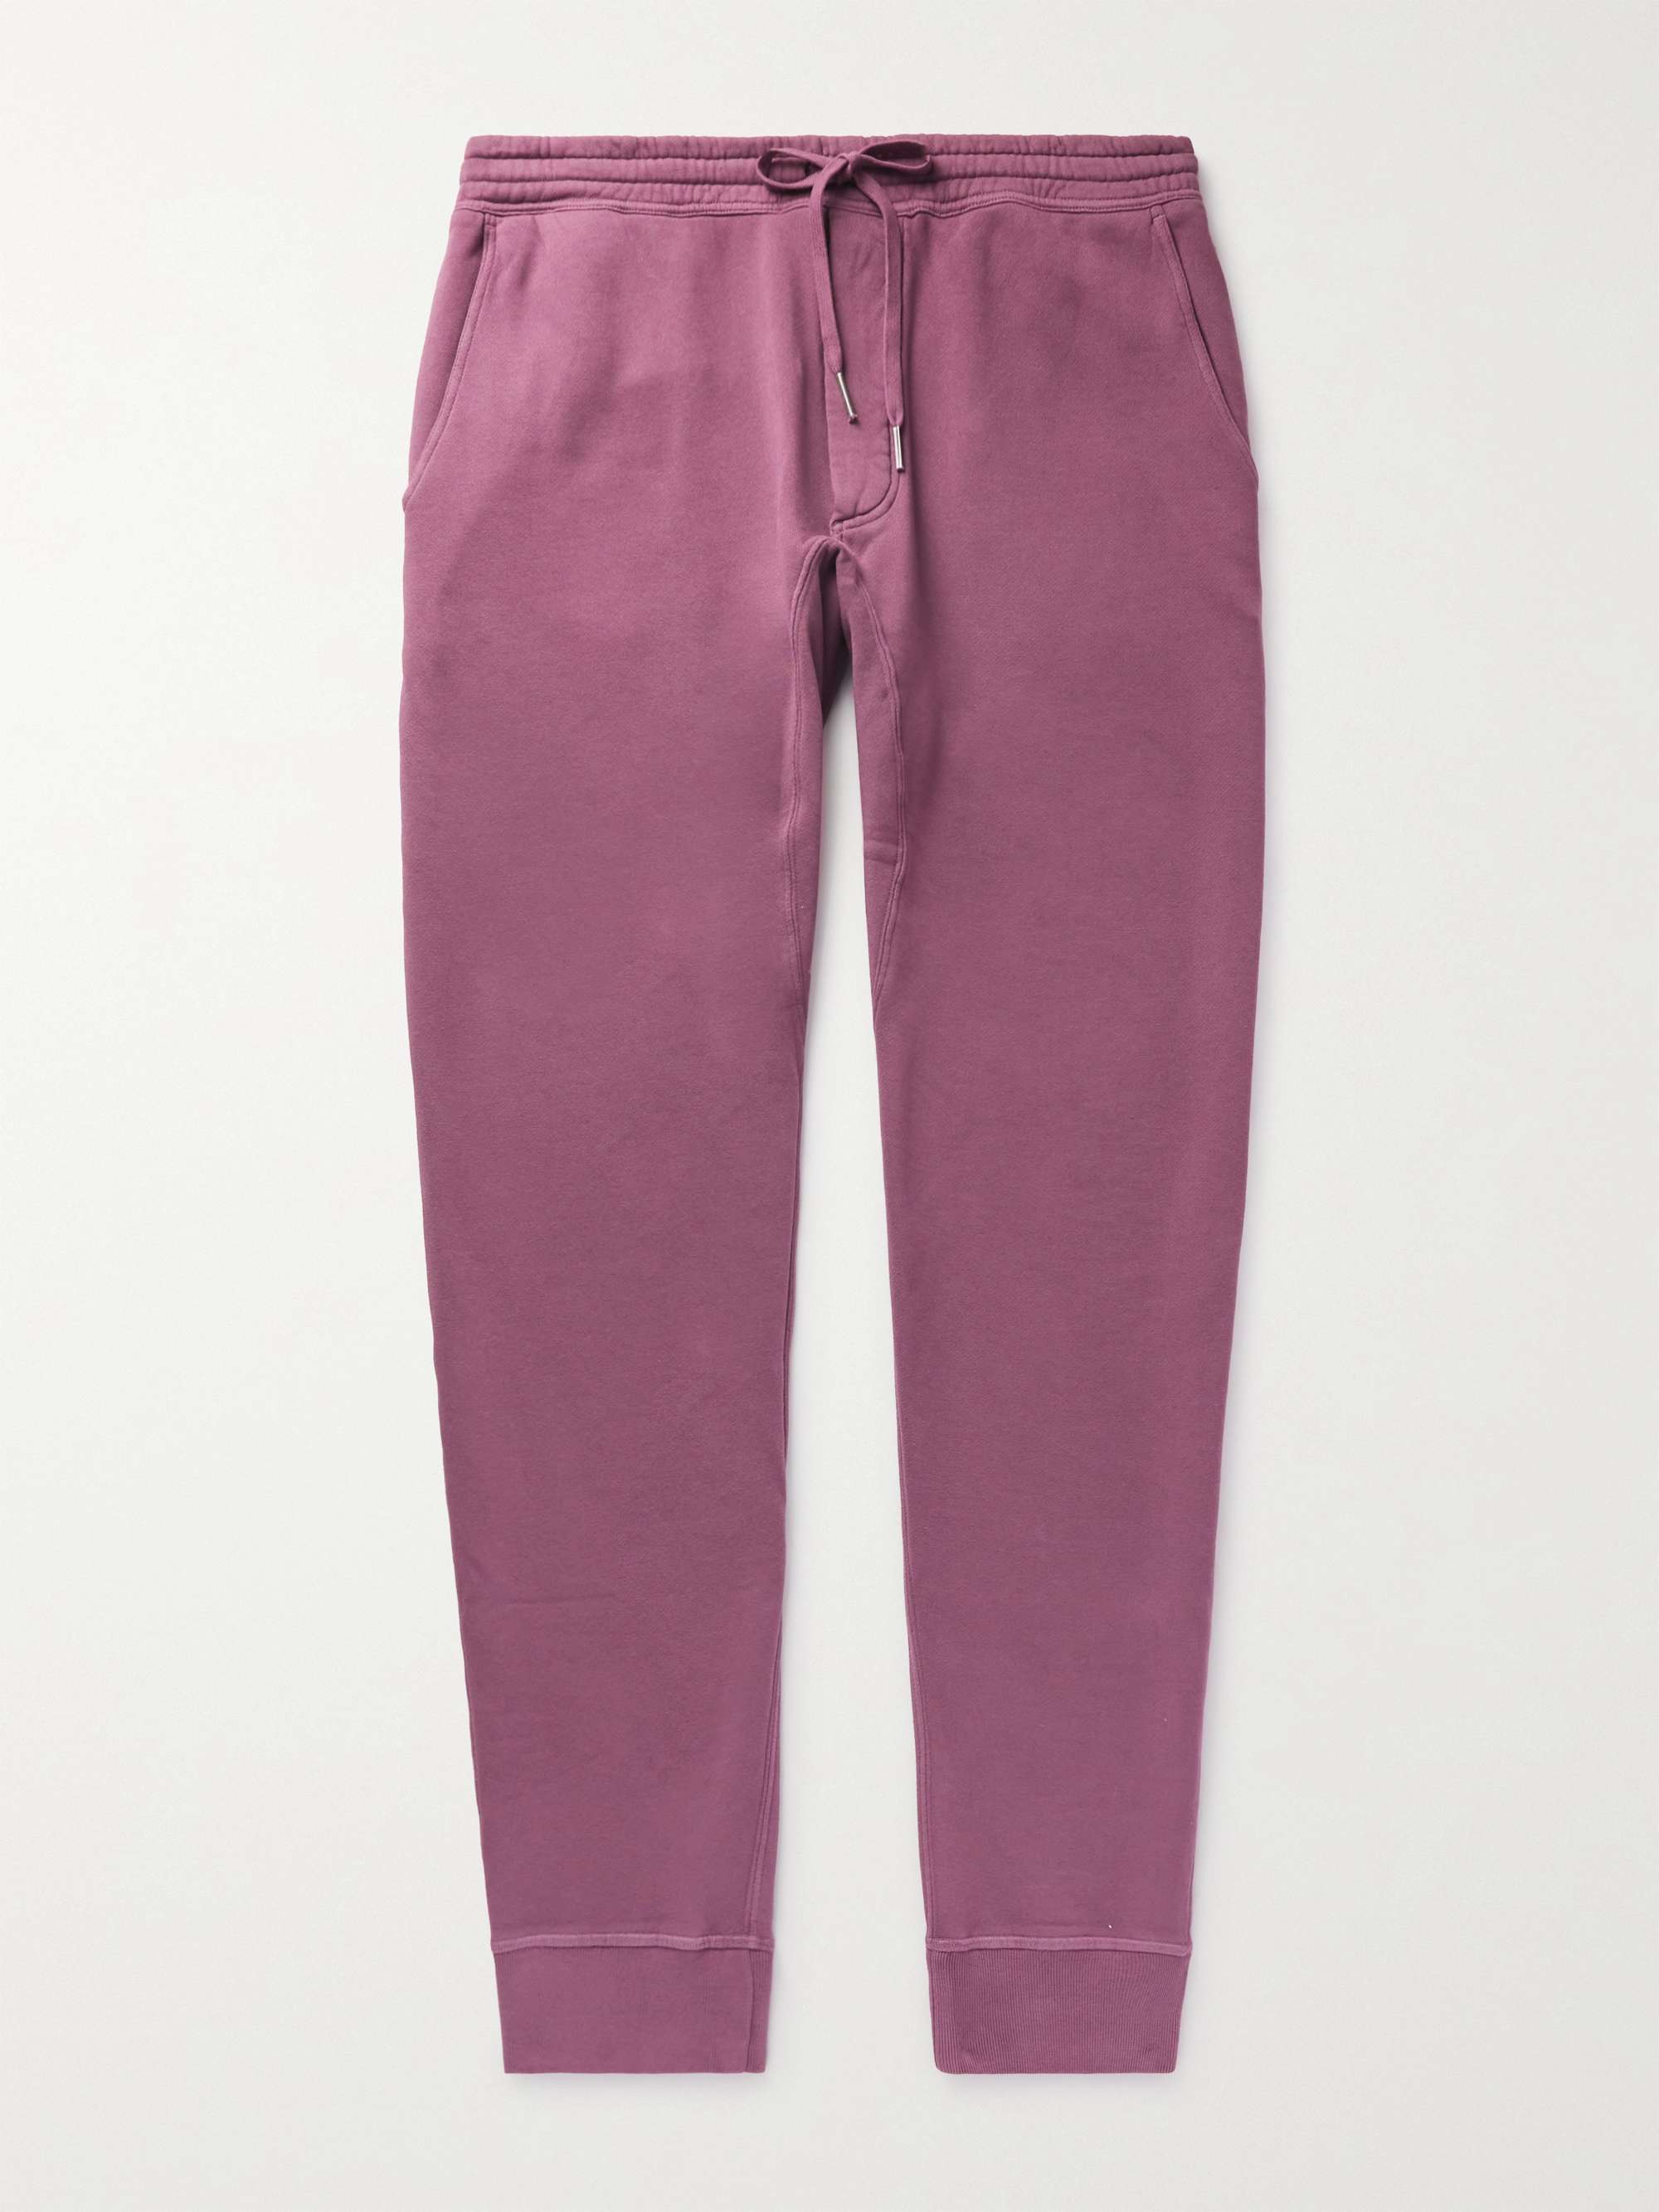 TOM FORD Tapered Garment-Dyed Cotton-Jersey Sweatpants